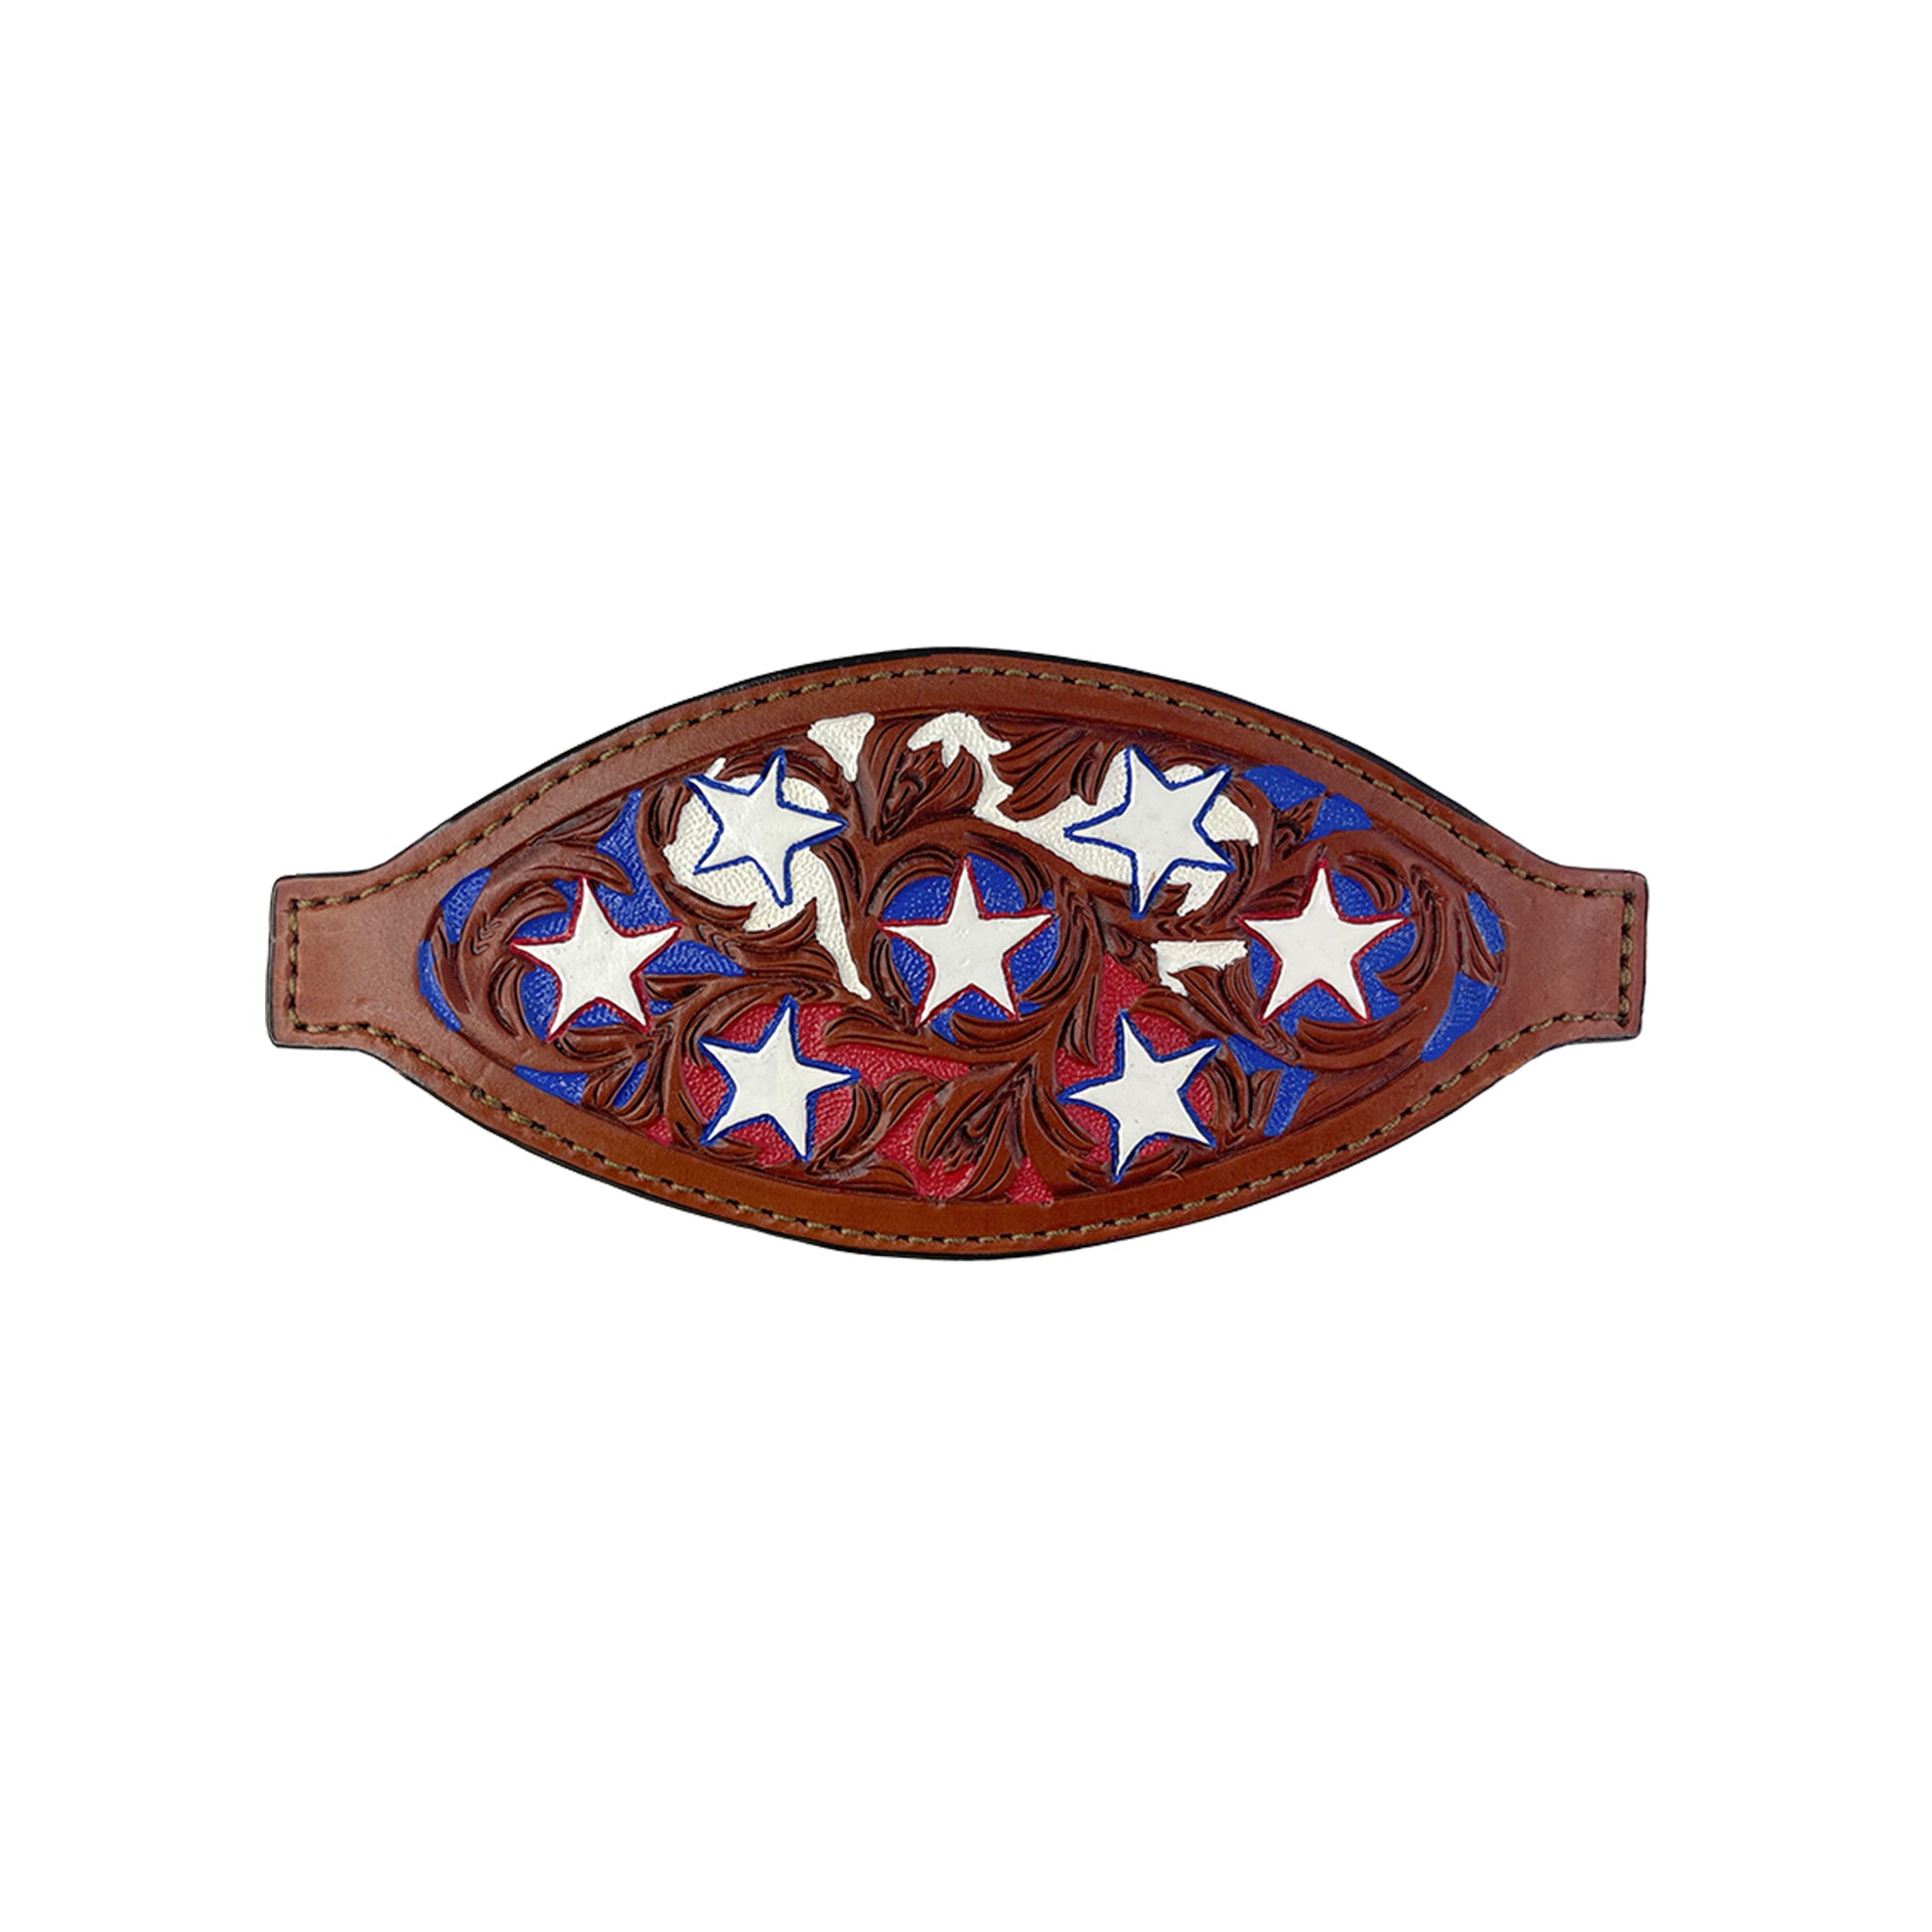 Bronc nose toast leather combo AA/star tooling with multicolored background paint.